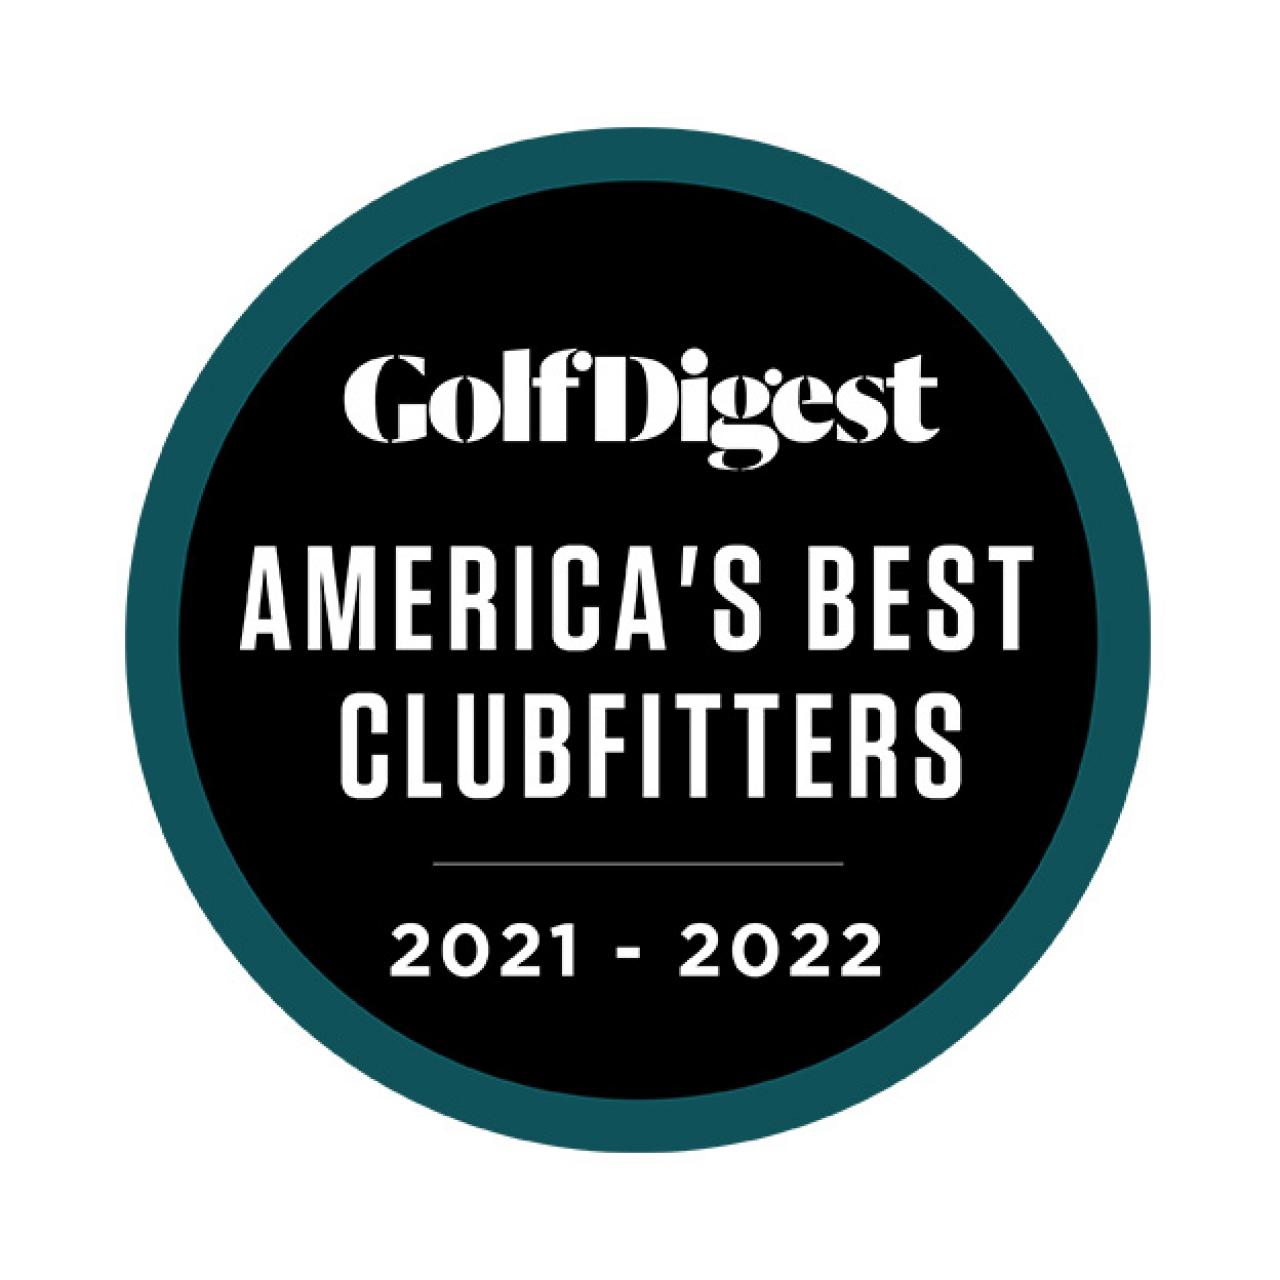 MK Golf Named One of Golf Digest’s Best Clubfitters for 2021